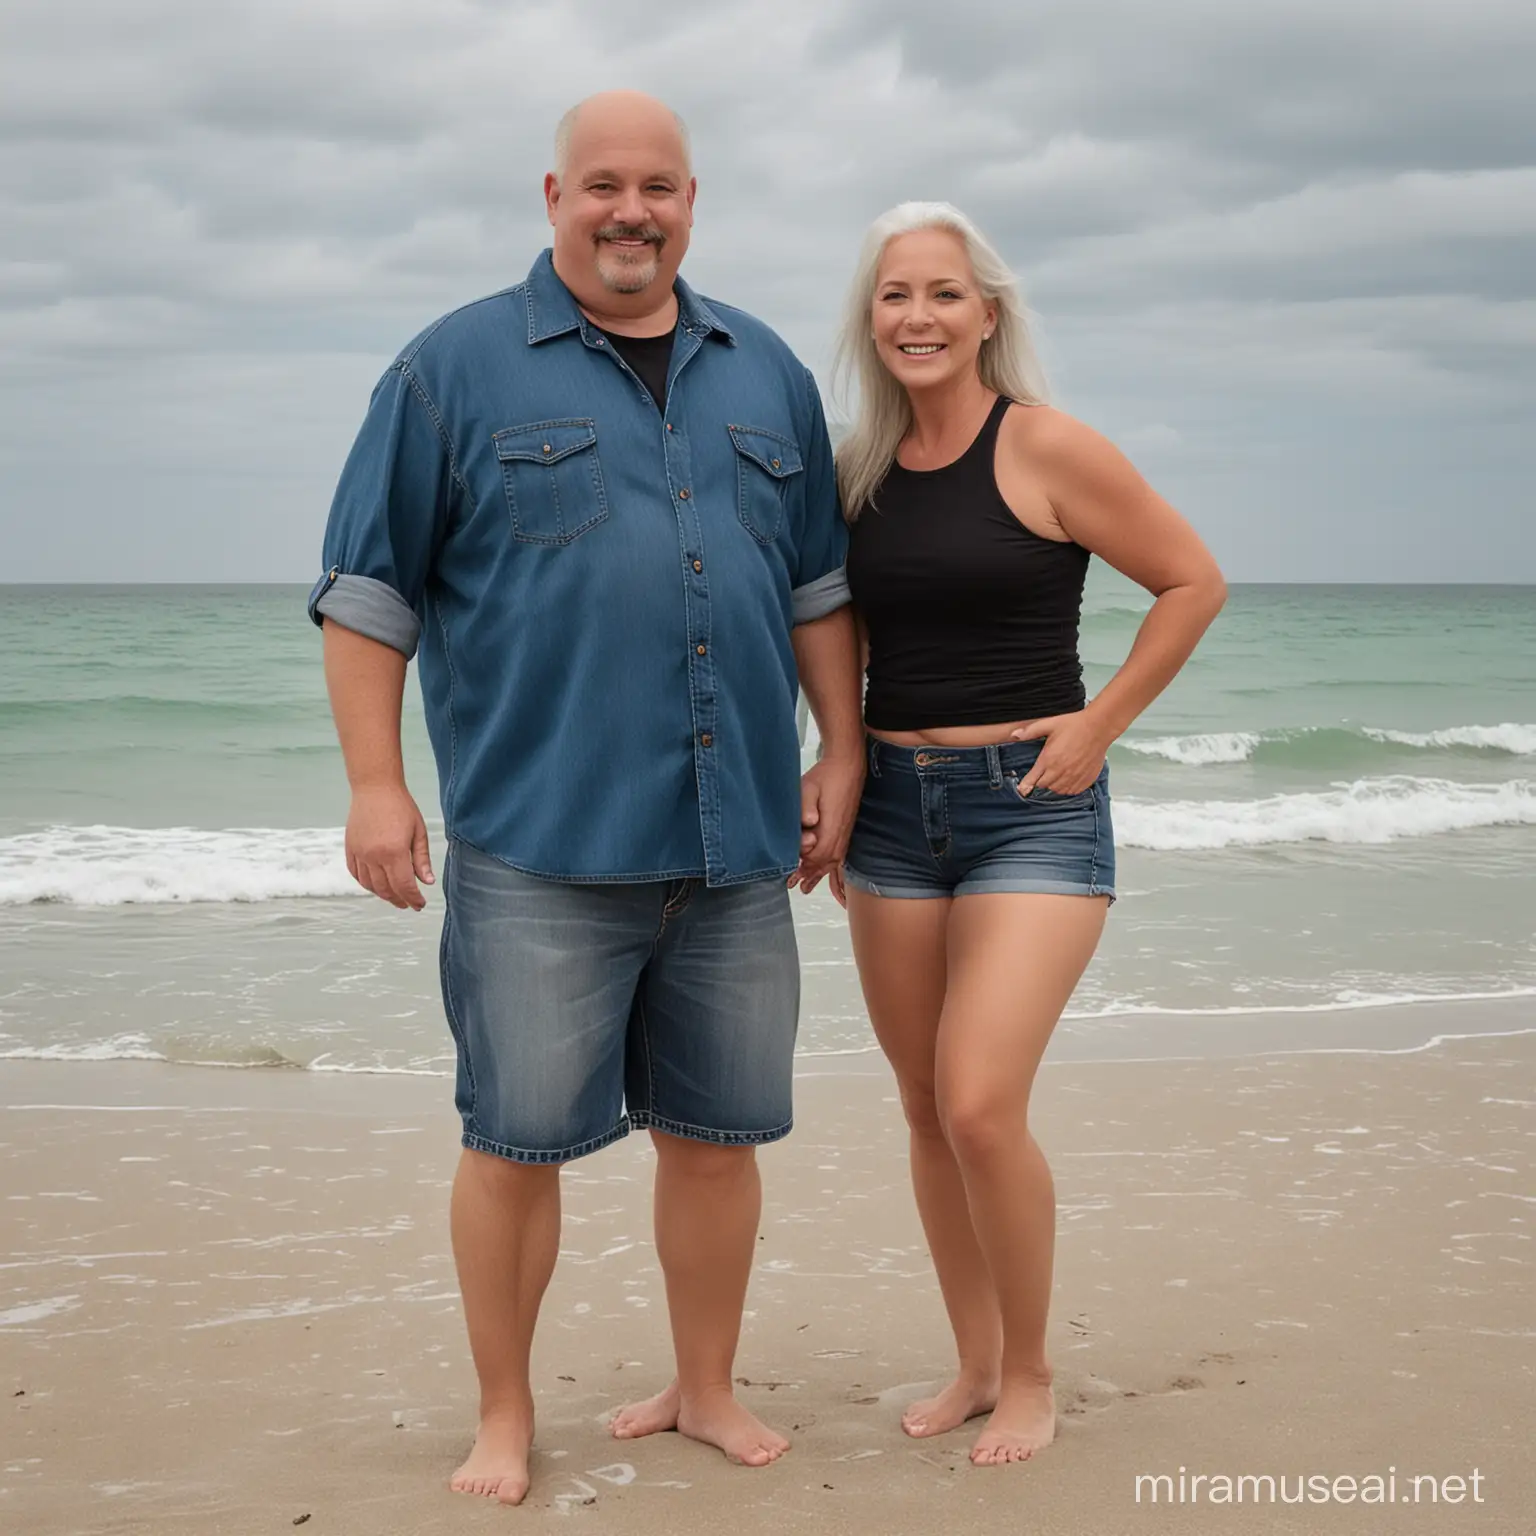 Couple Enjoying Sunny Florida Beach Chubby Husband and Fit Wife in Casual Attire